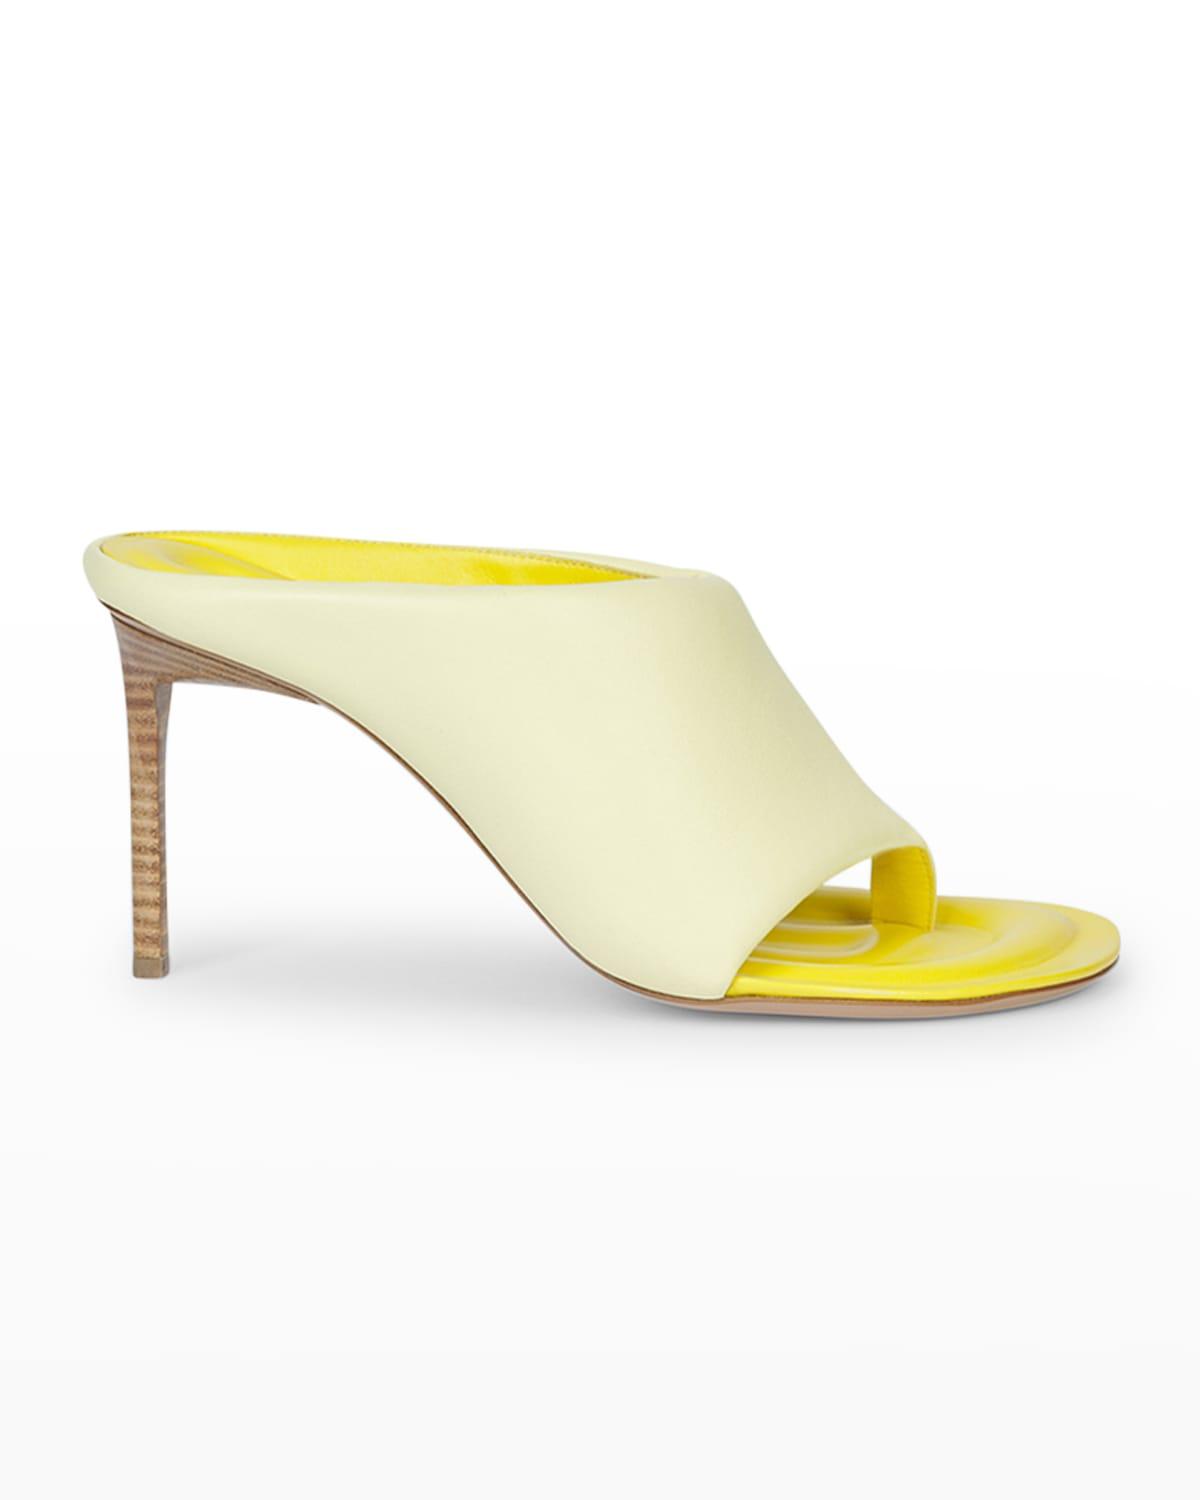 Jacquemus Les Mules Limone Puffy Lambskin Sandals in Yellow | Lyst